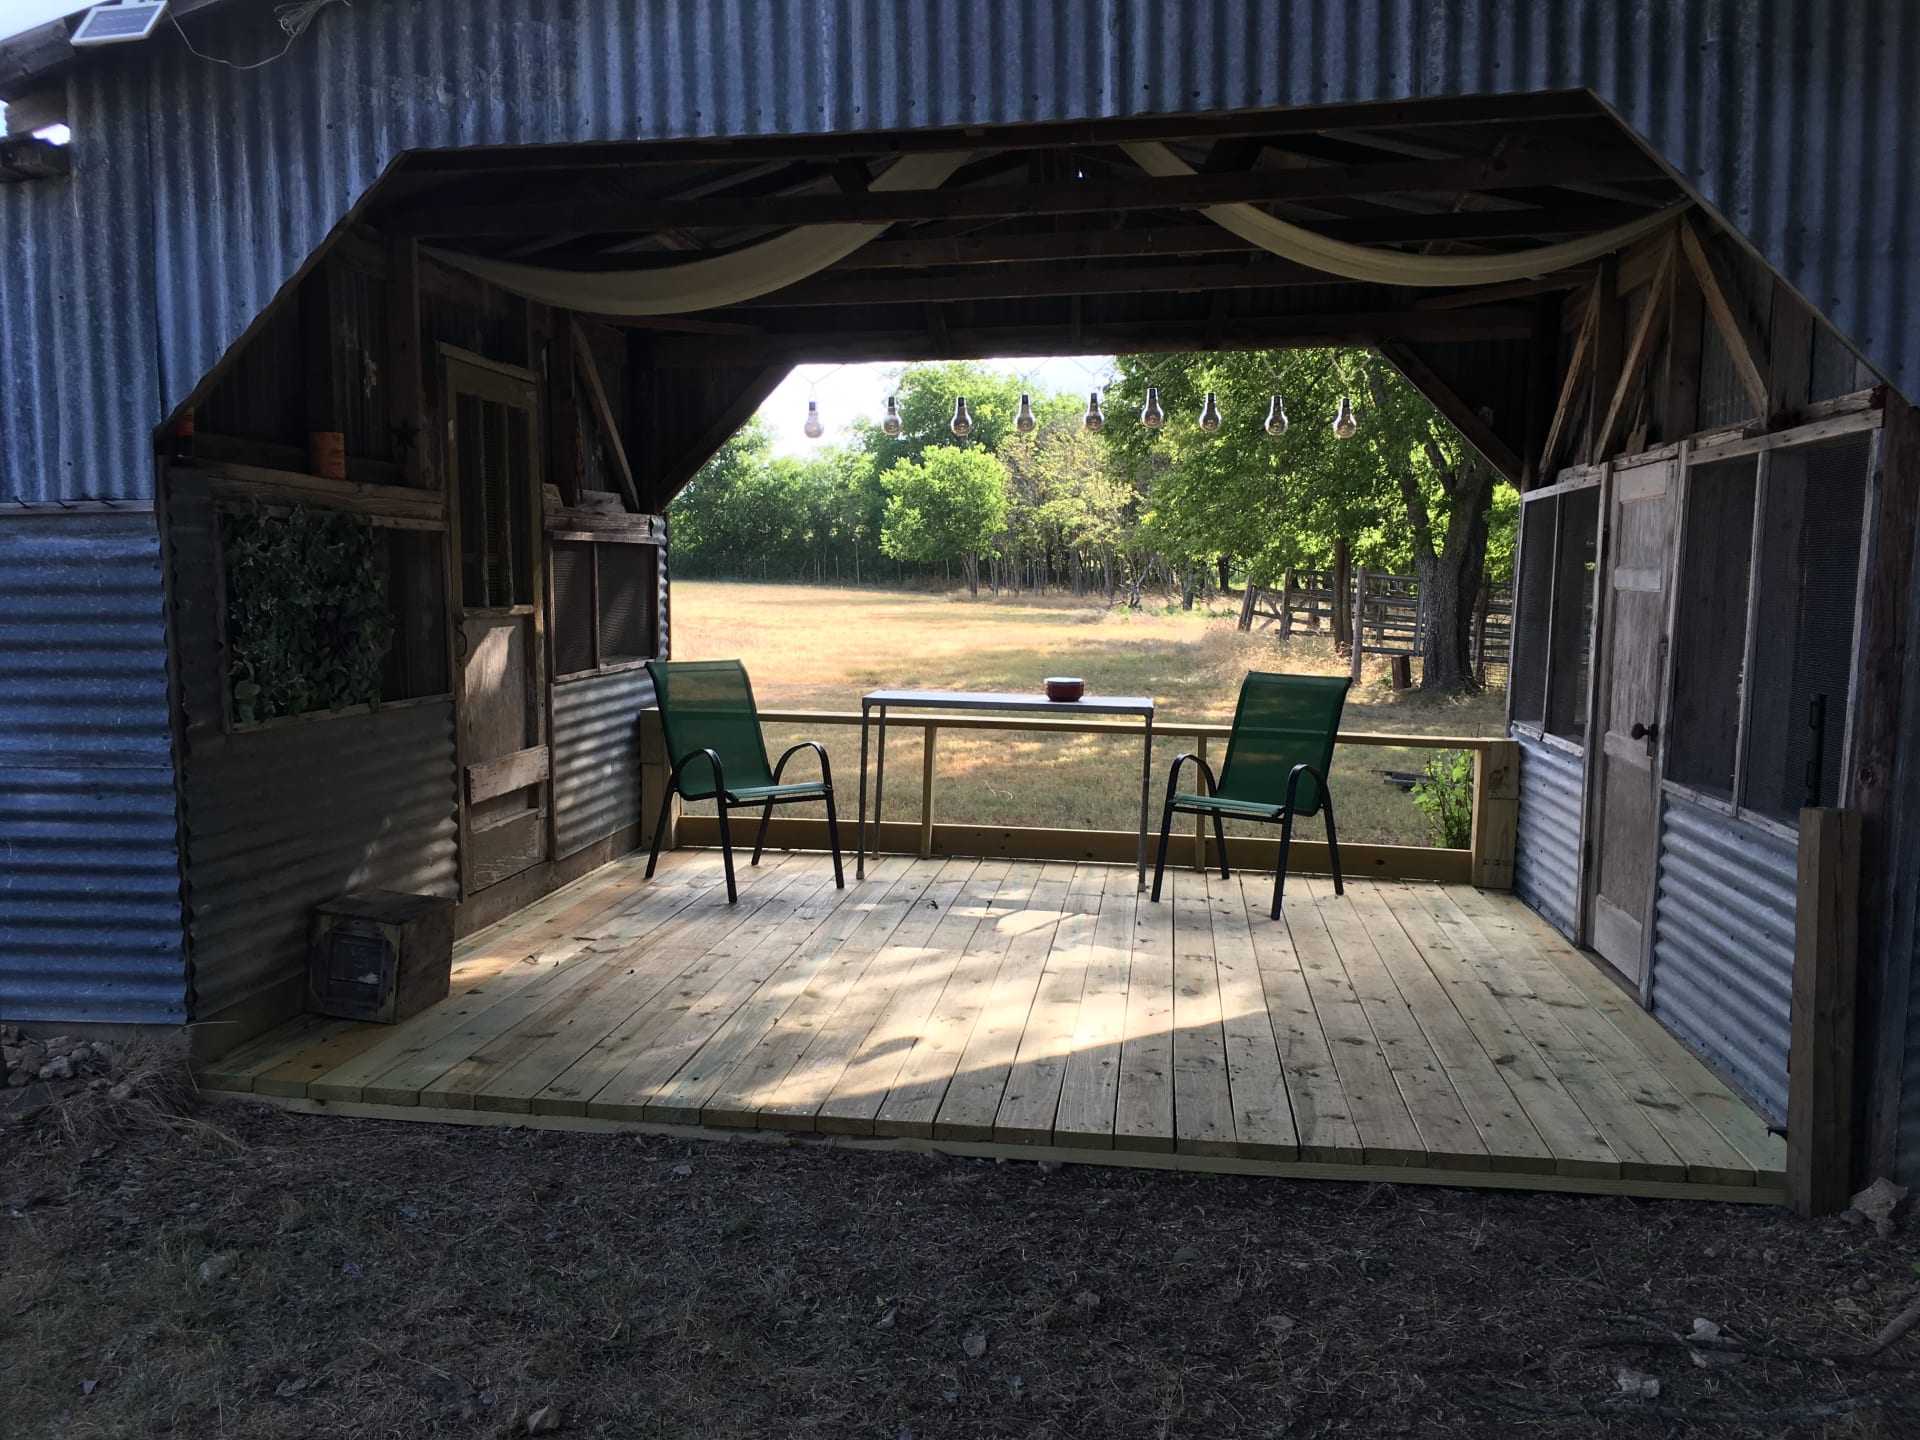 This building was renovated and made into a ramada,  A great place to enjoy or read.   It is located just feet from the cabin/tiny house. Note that it has been opened up to allow entrance to a fire pit.